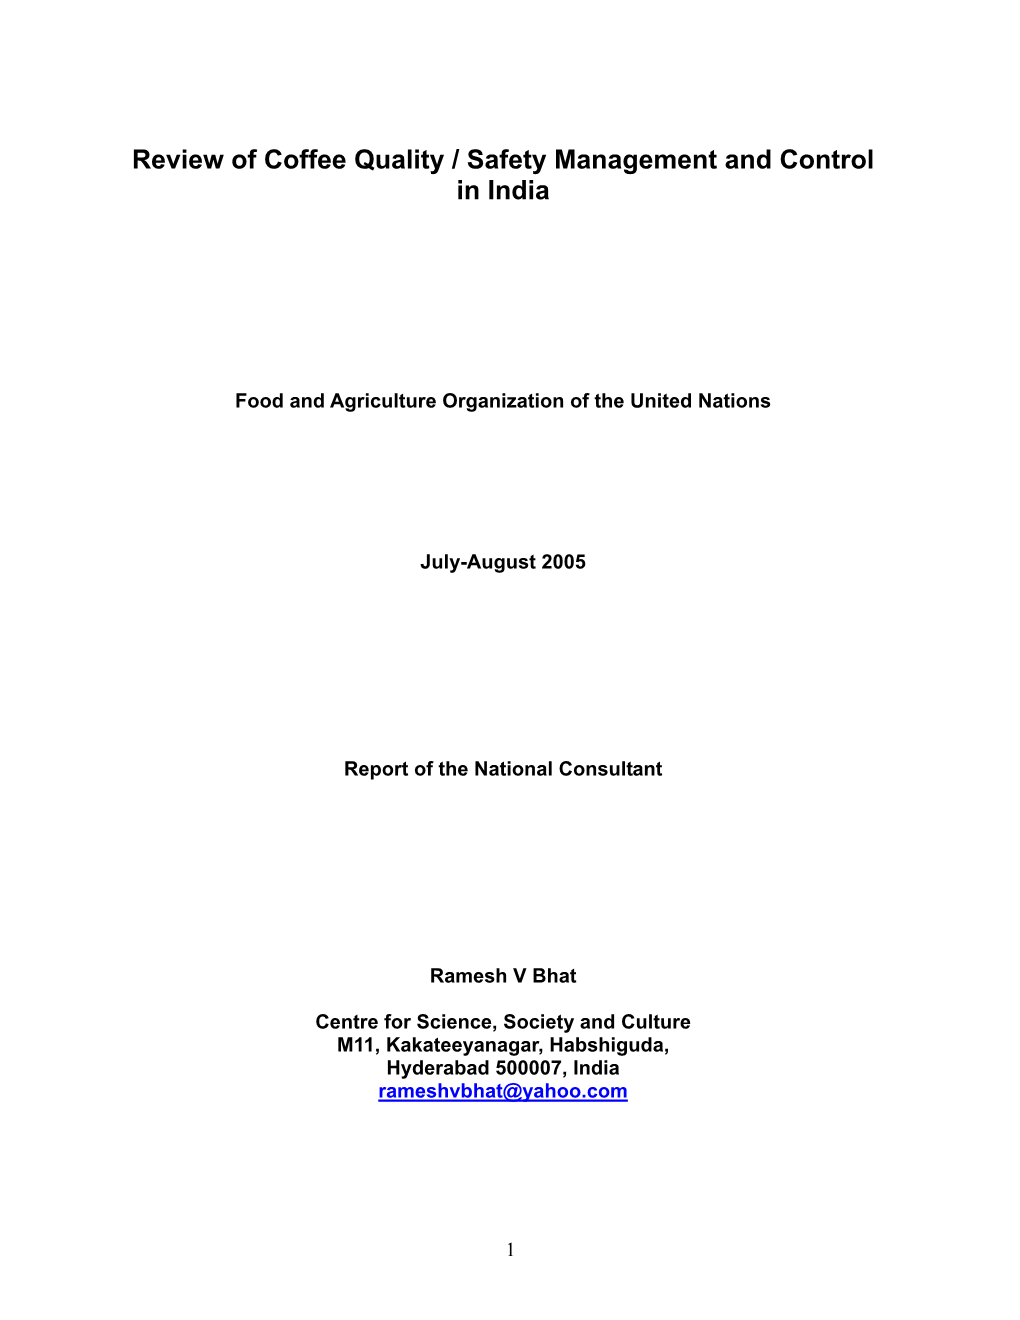 Coffee Quality and Safety Management and Control in India